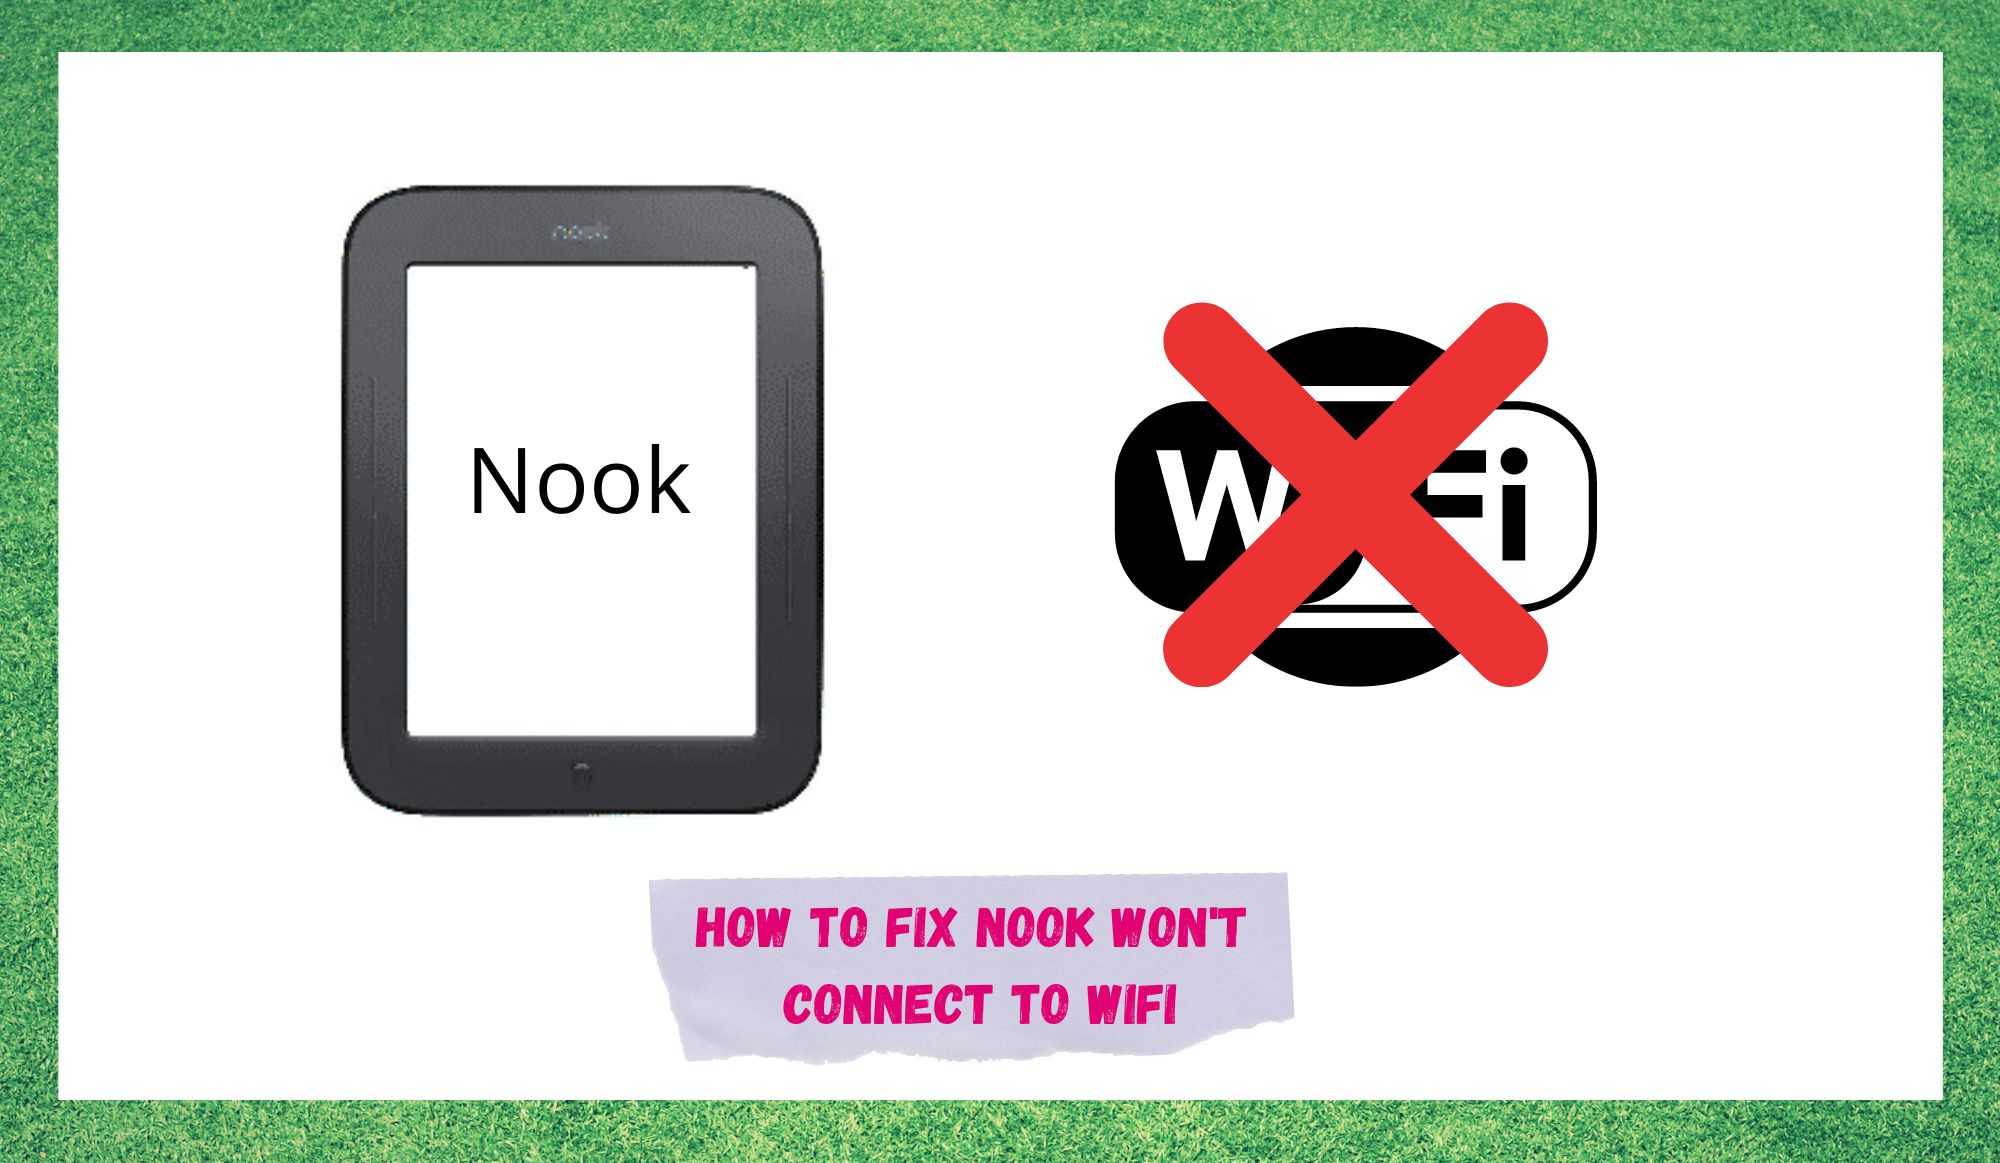 nook won't connect to wifi